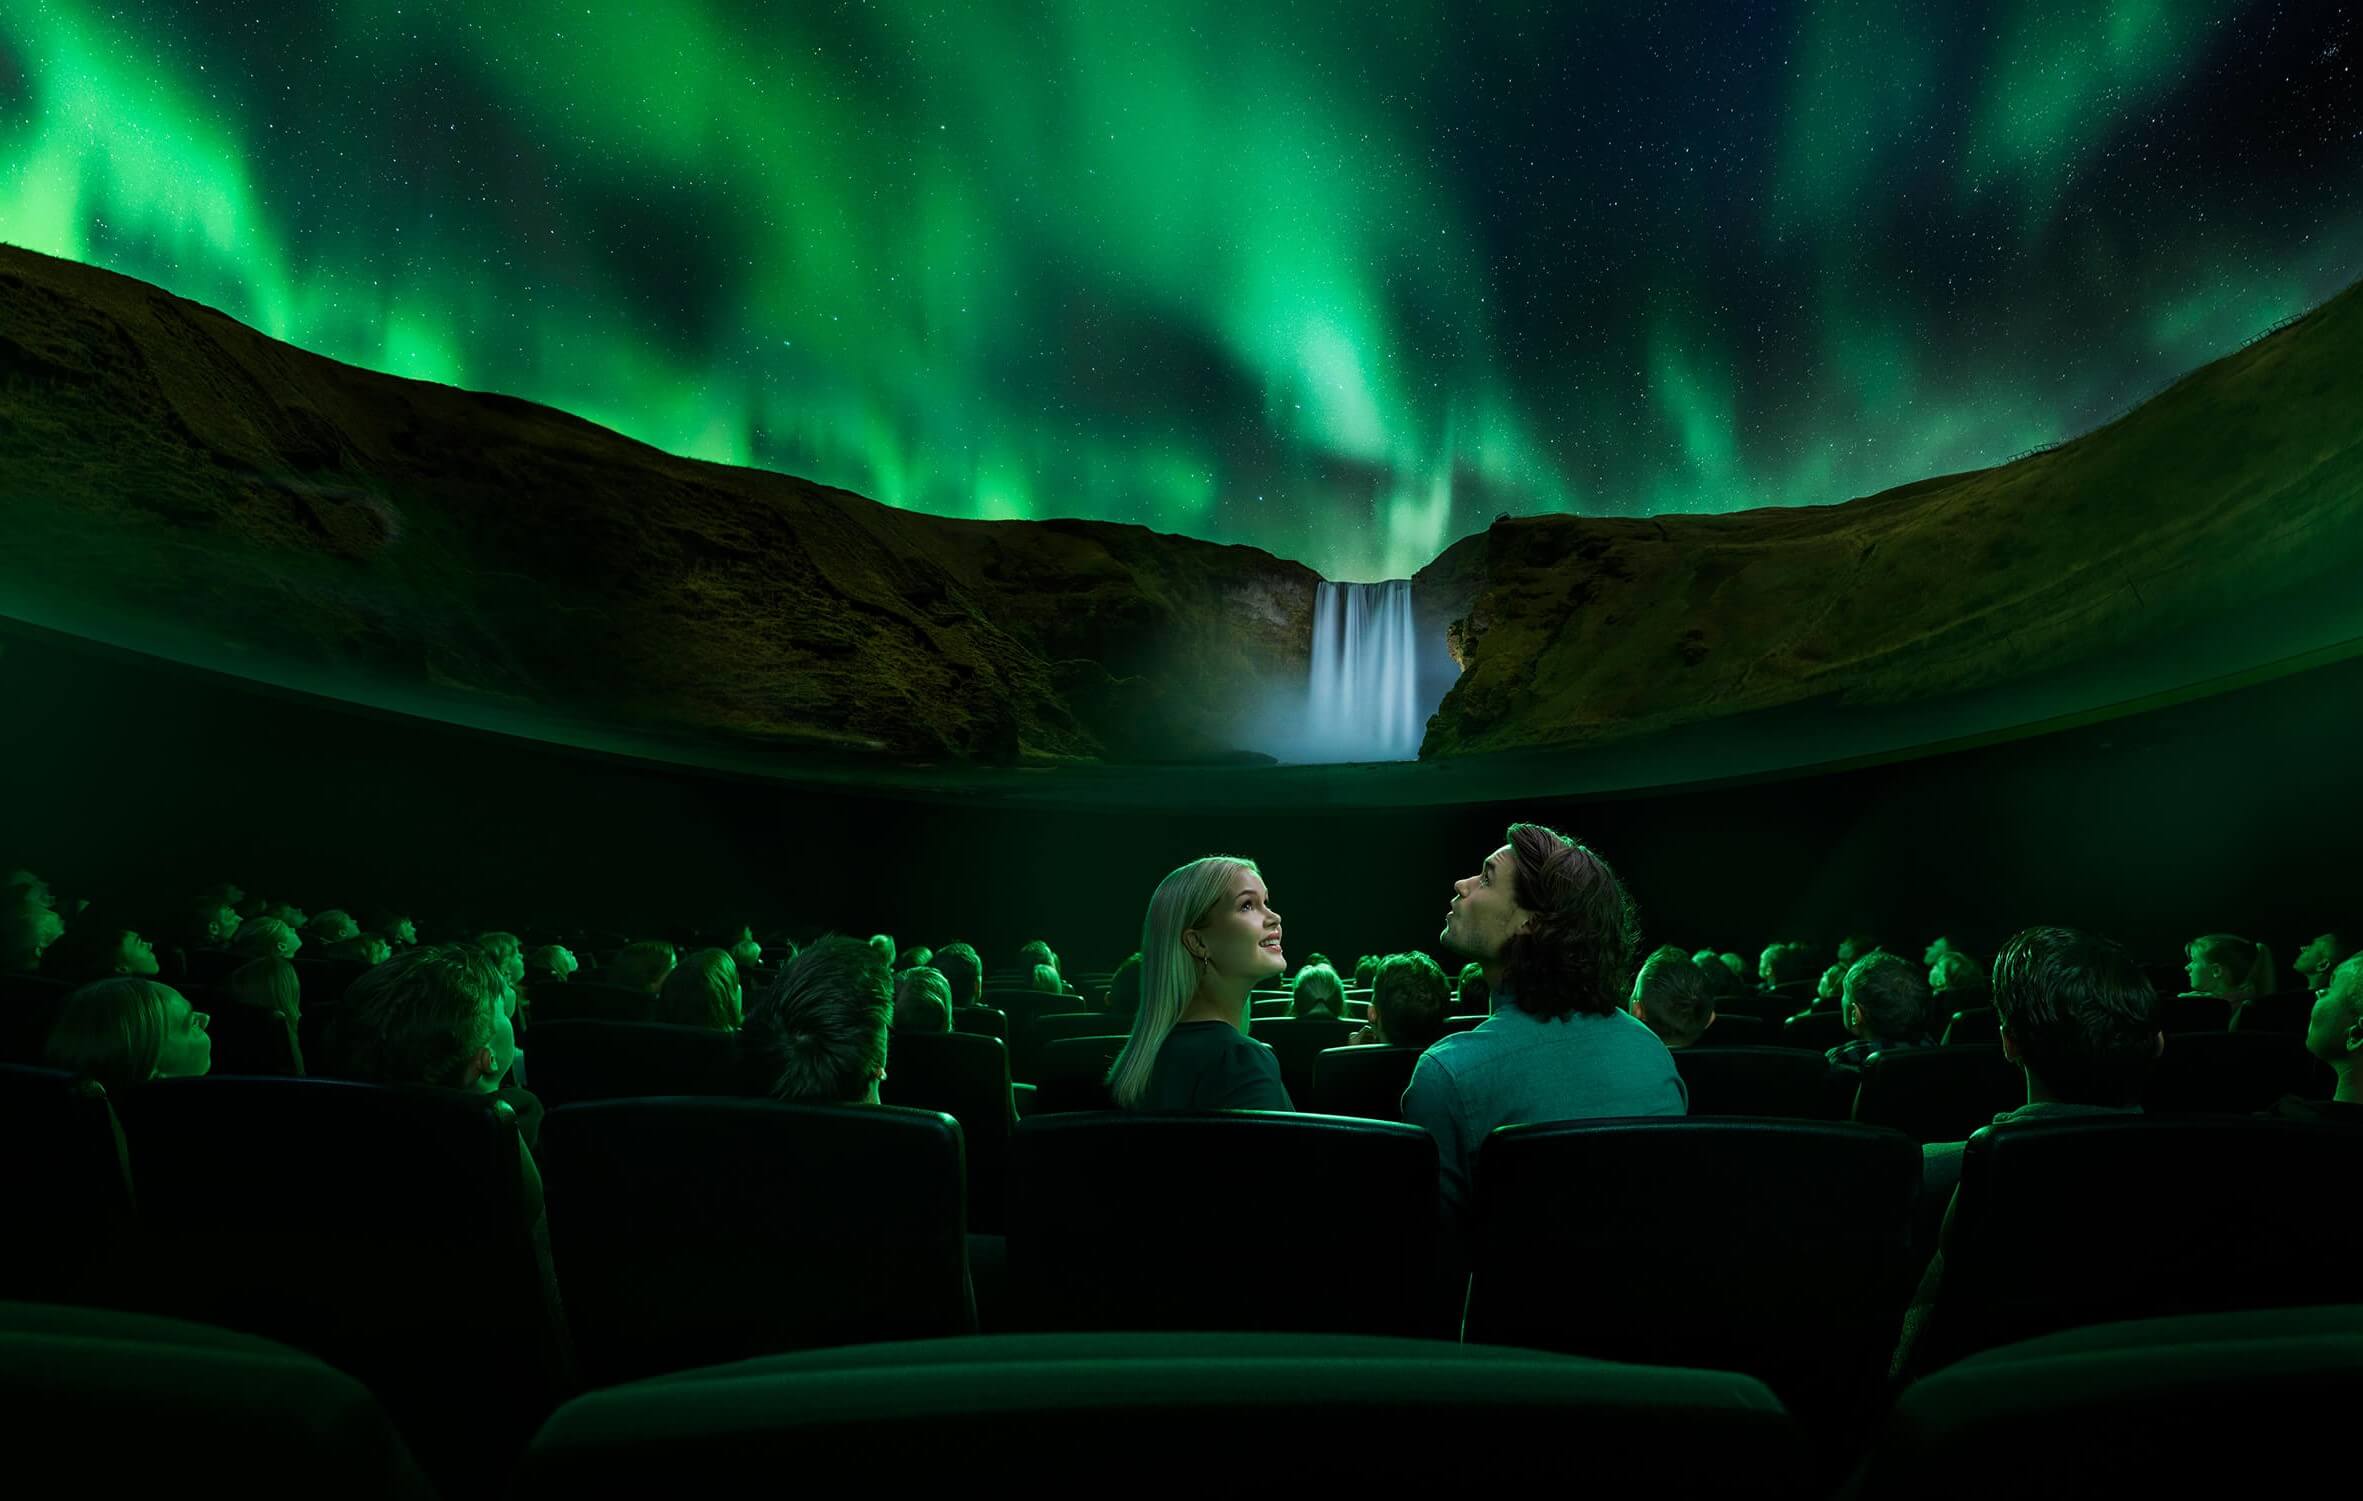 See the amazing aurora show in Perlan Museum